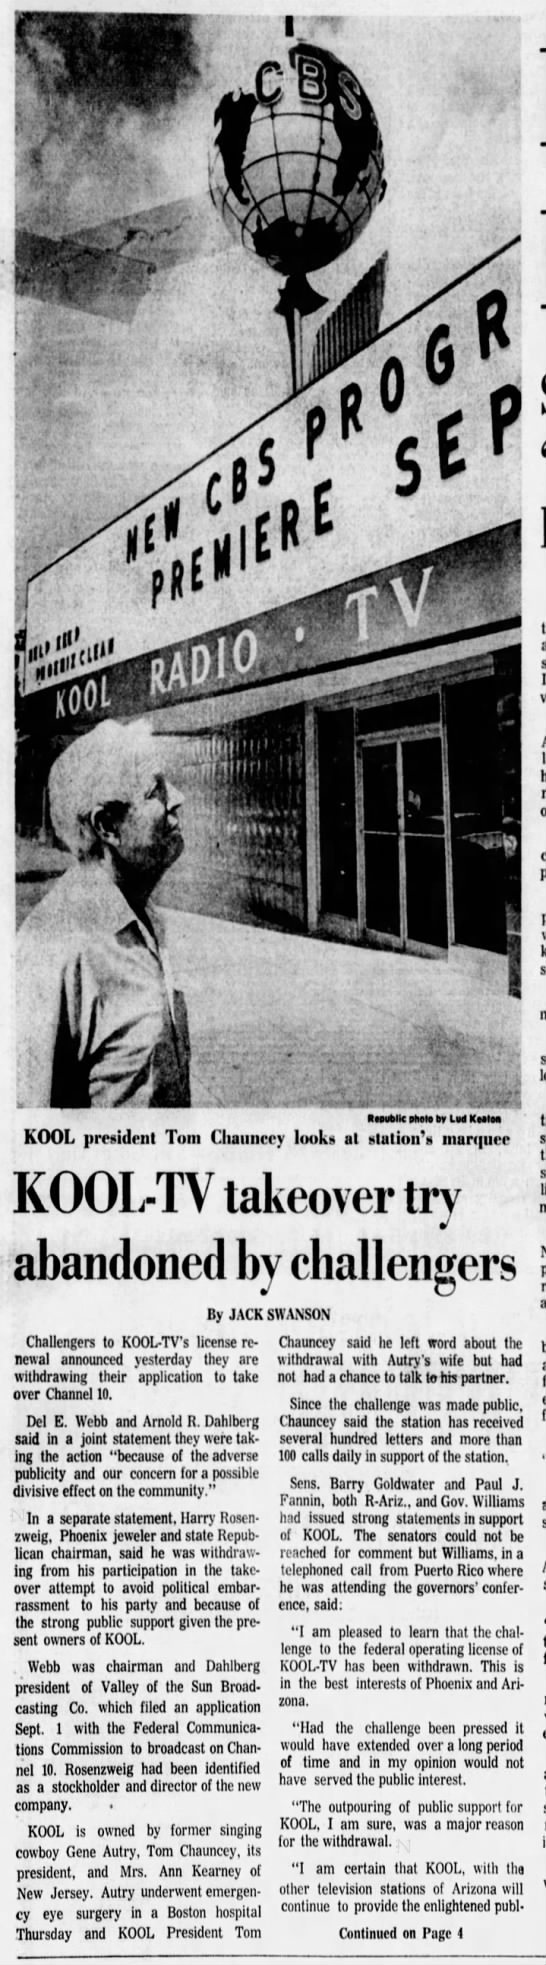 KOOL-TV takeover try abandoned by challengers - 